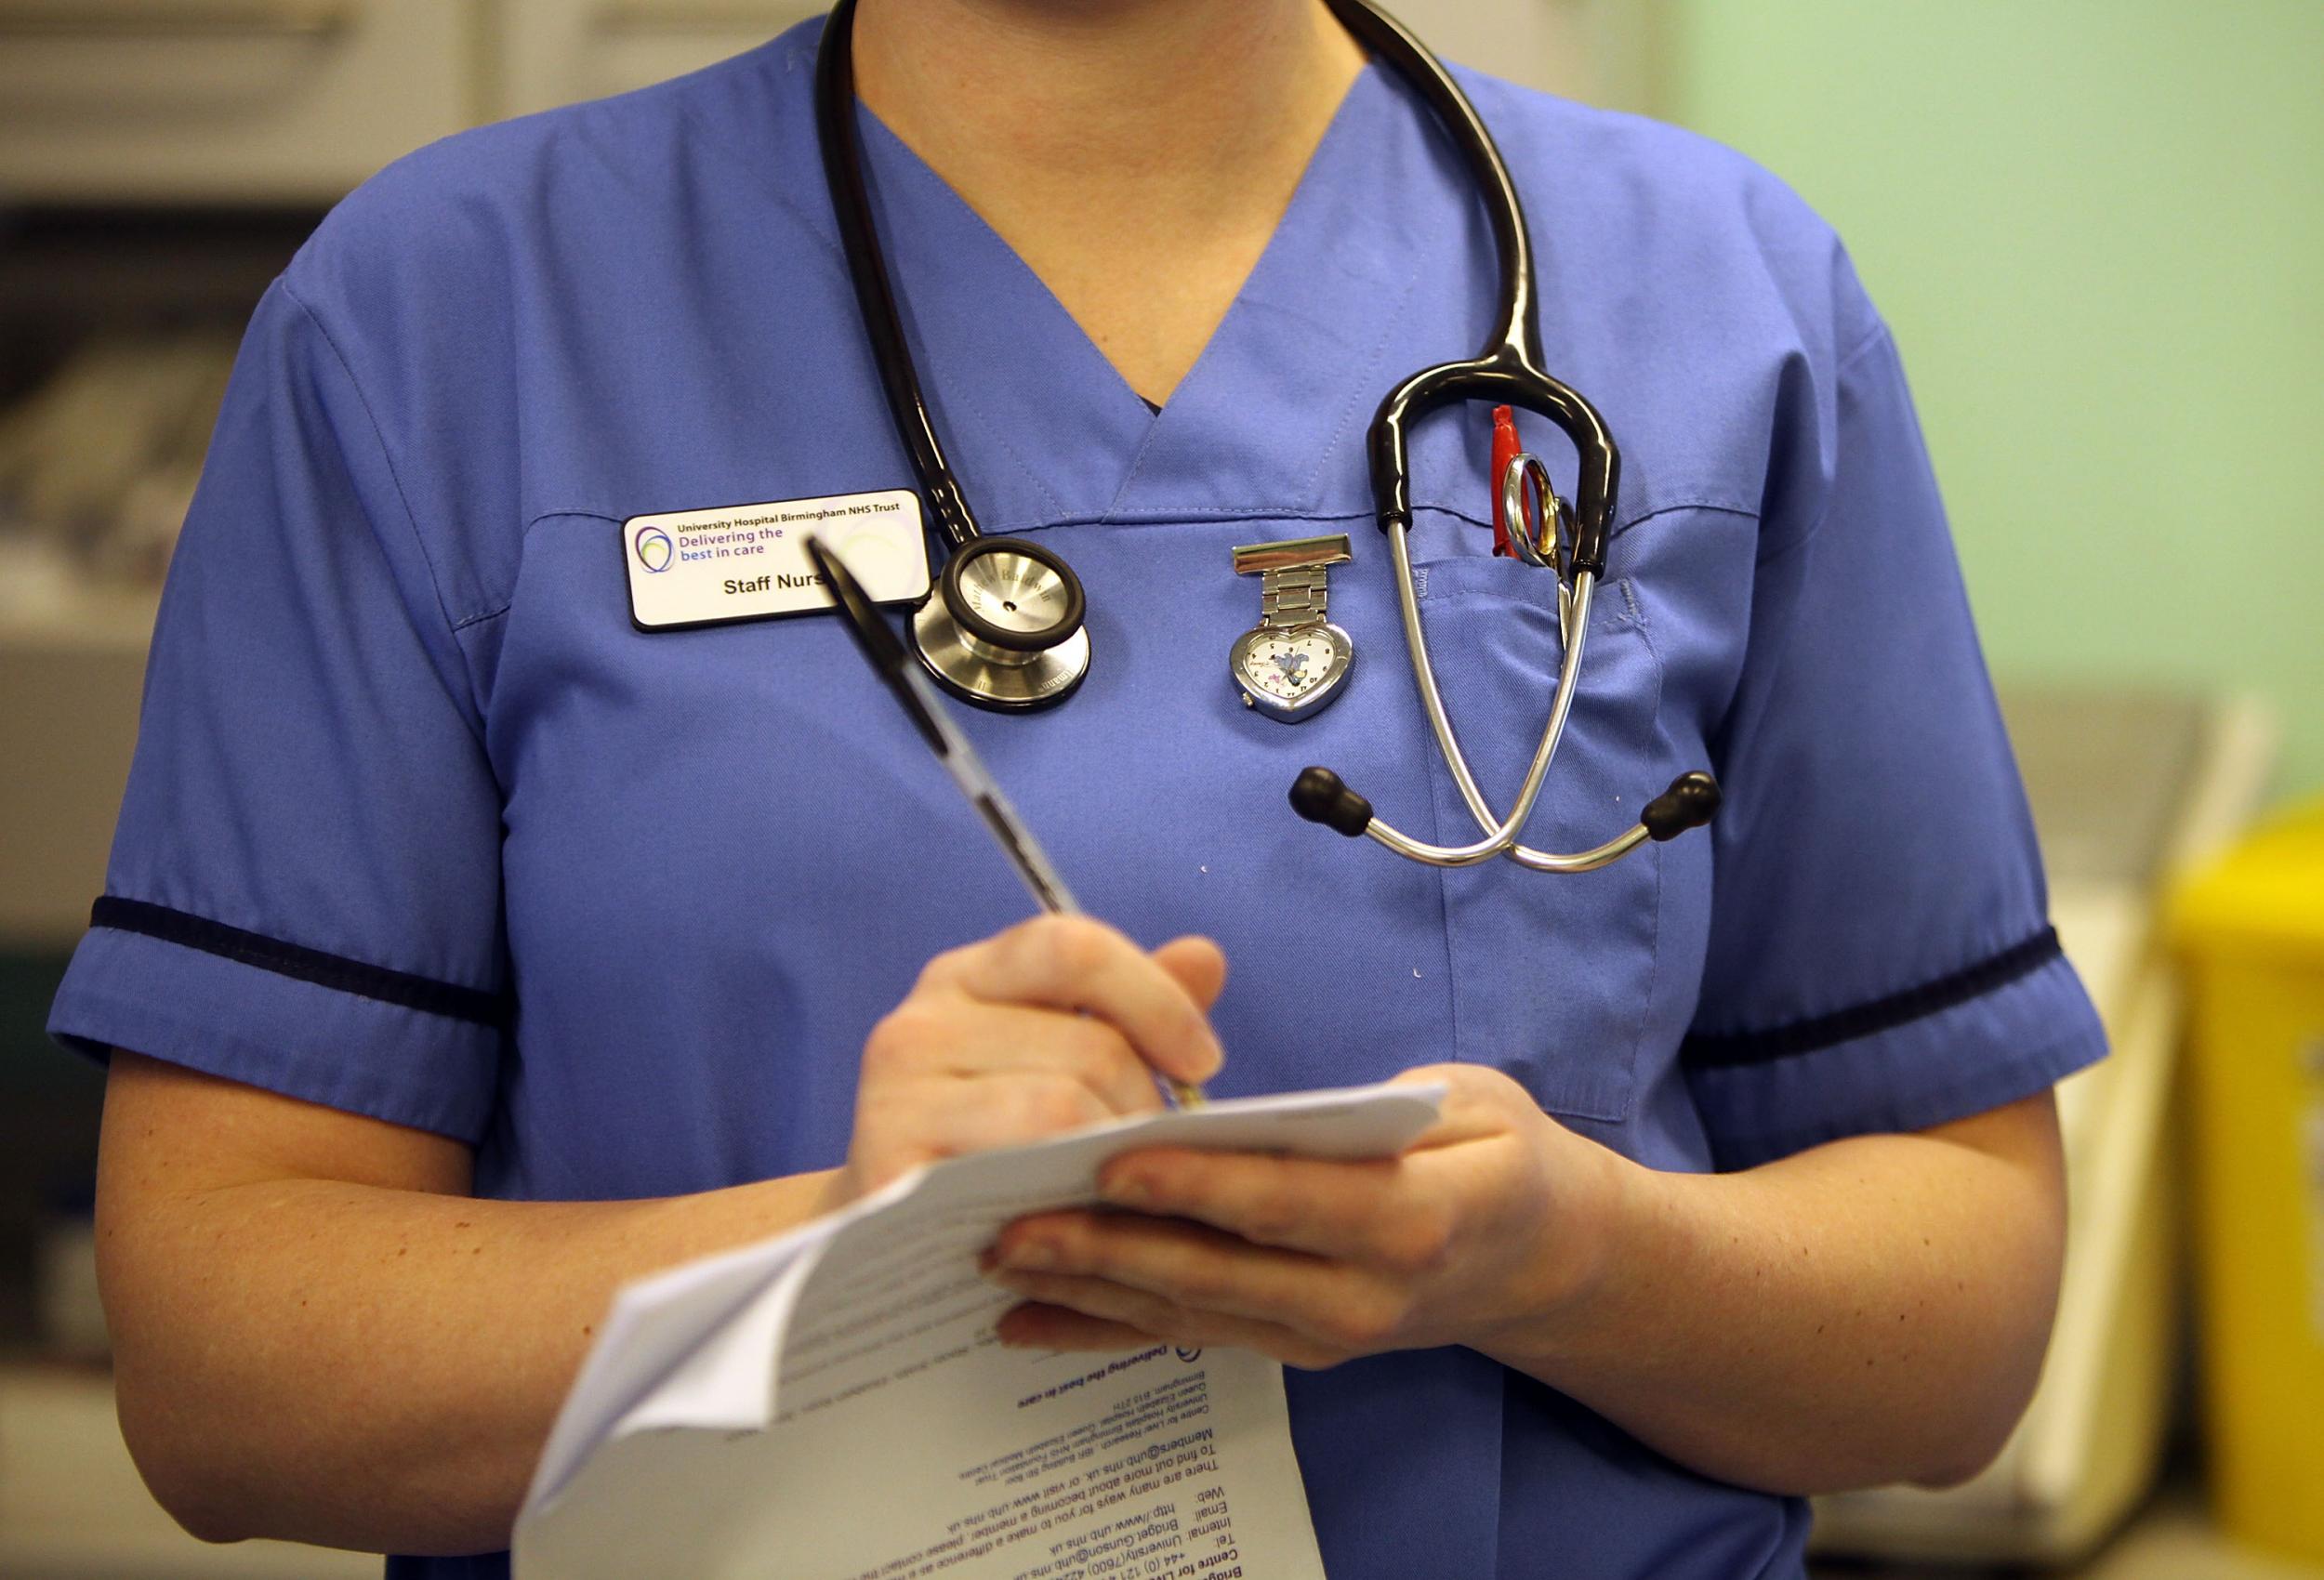 NHS England has been told to come up with better plans to deliver 50,000 extra nurses